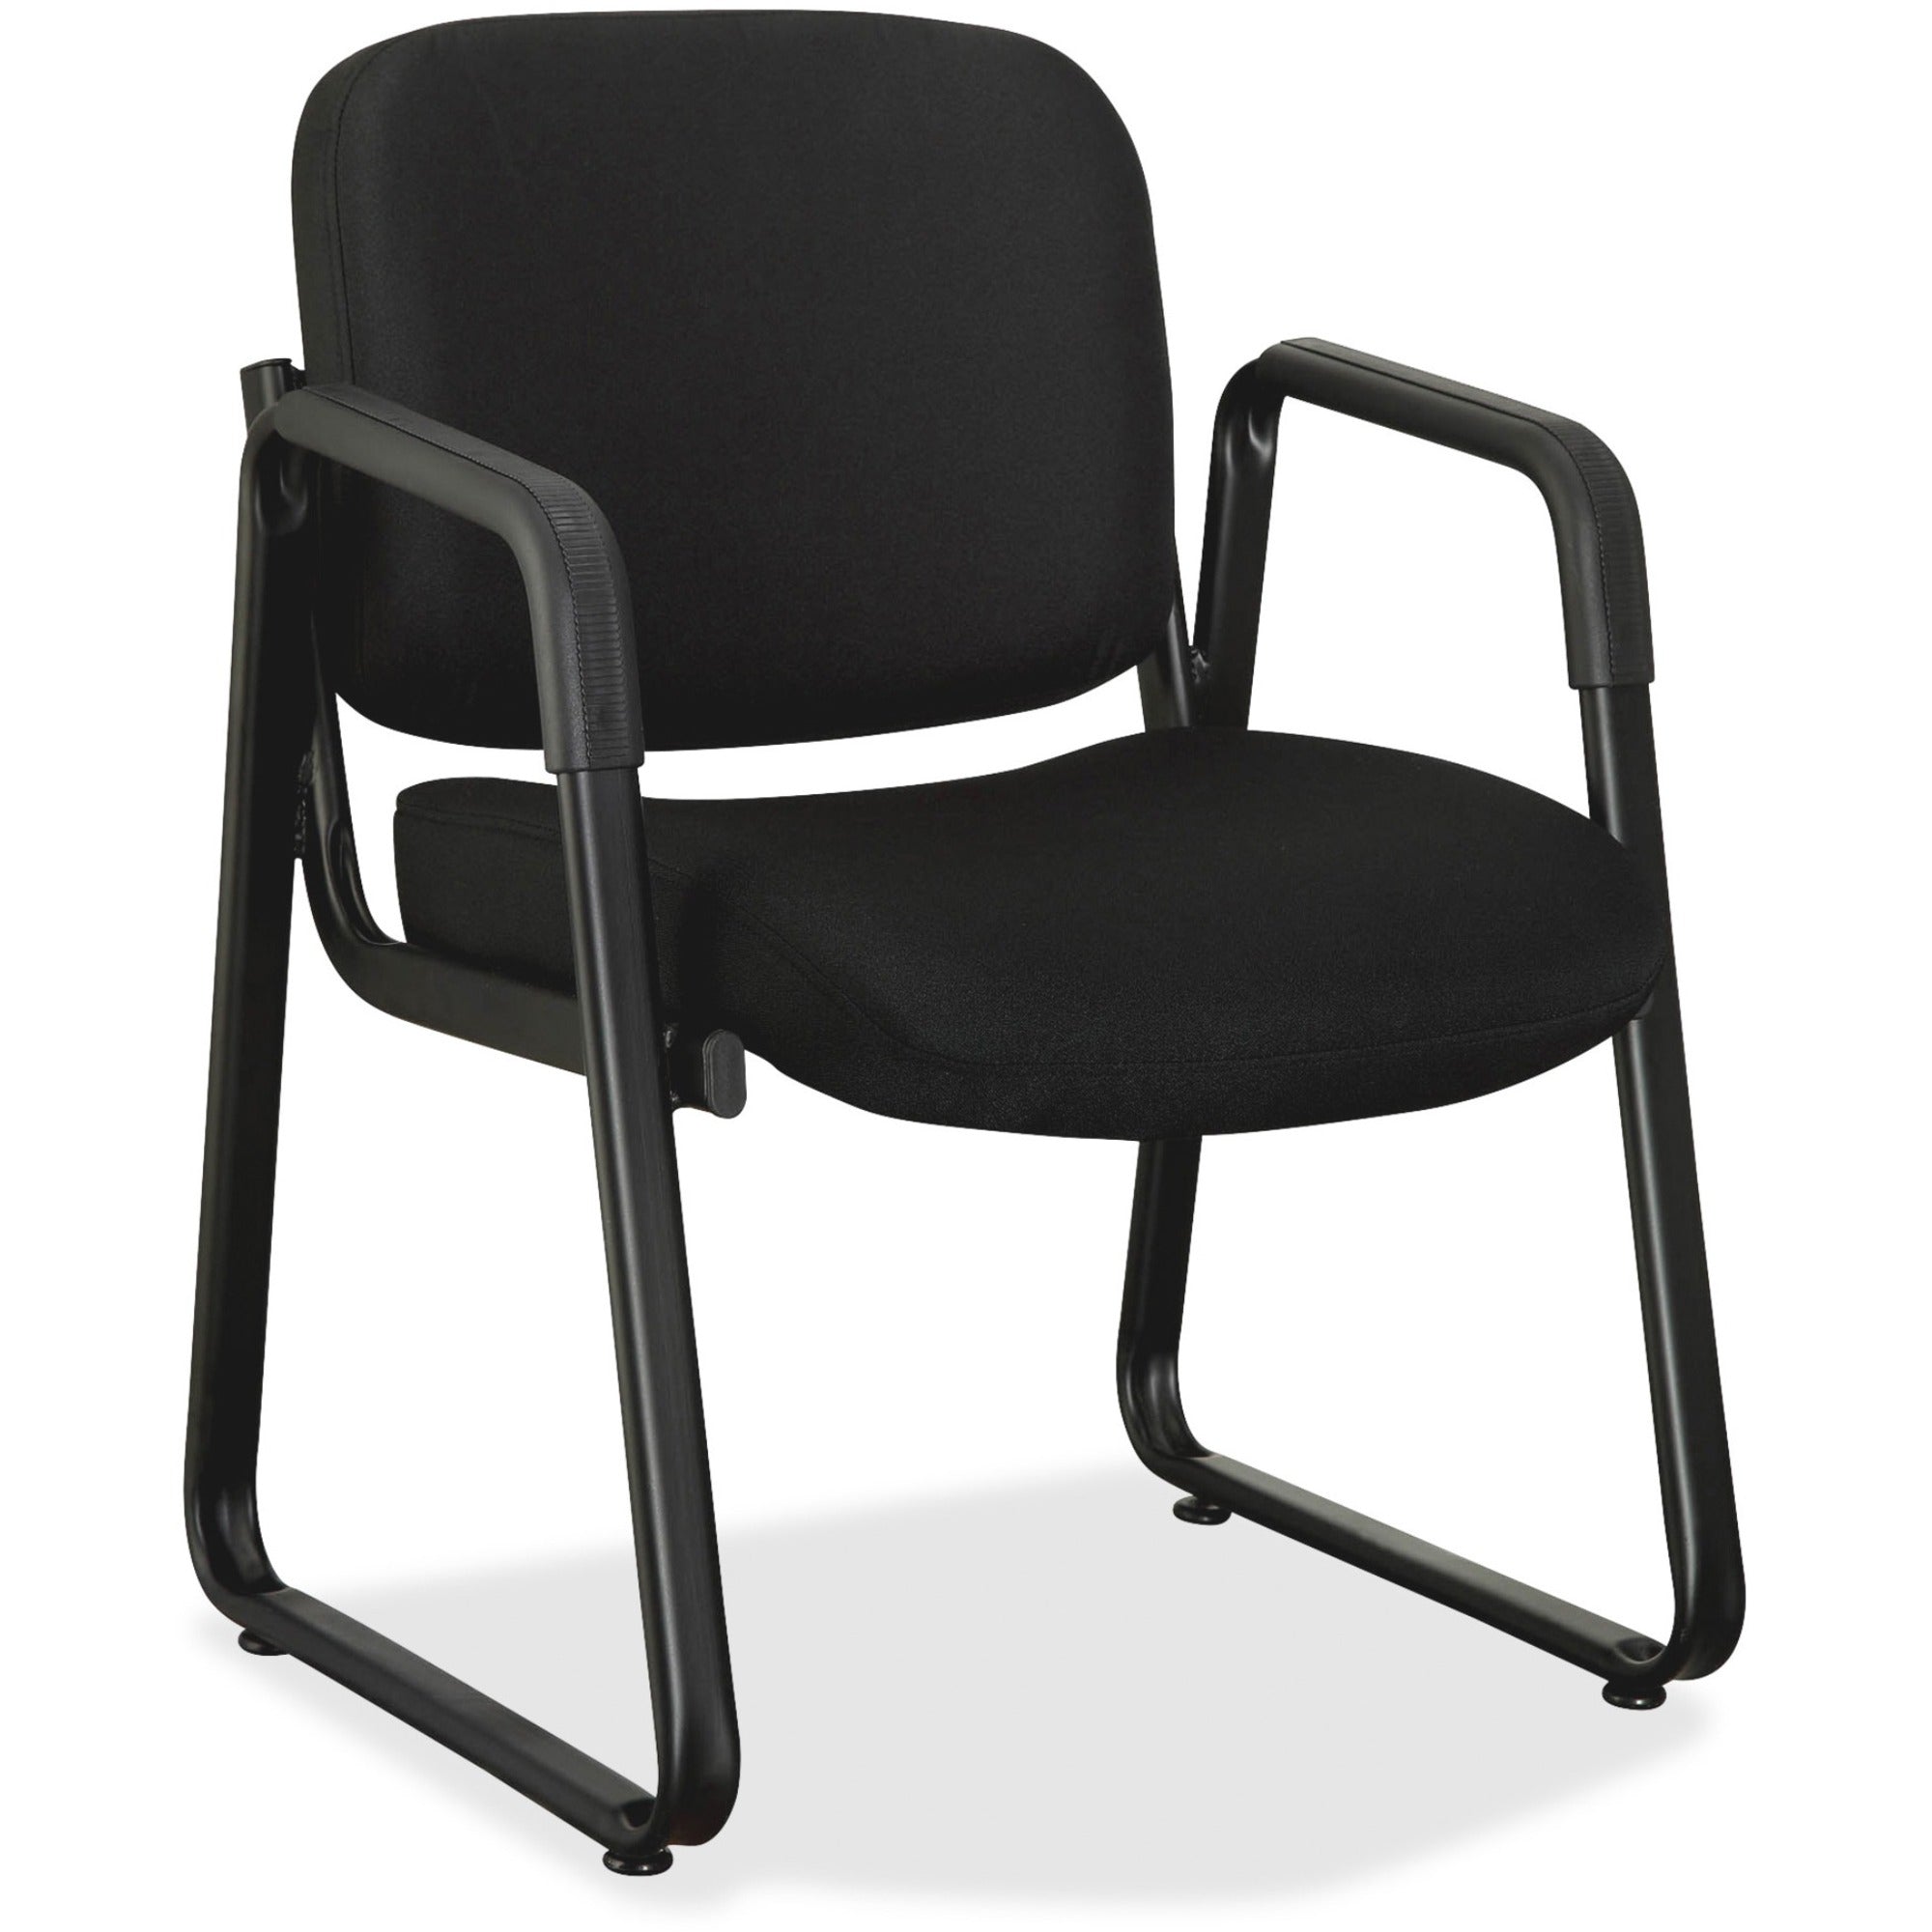 Lorell Upholstered Guest Chair - Black Fabric, Plywood Seat - Black Fabric, Plywood Back - Metal Frame - Sled Base - Black - 1 Each - 1